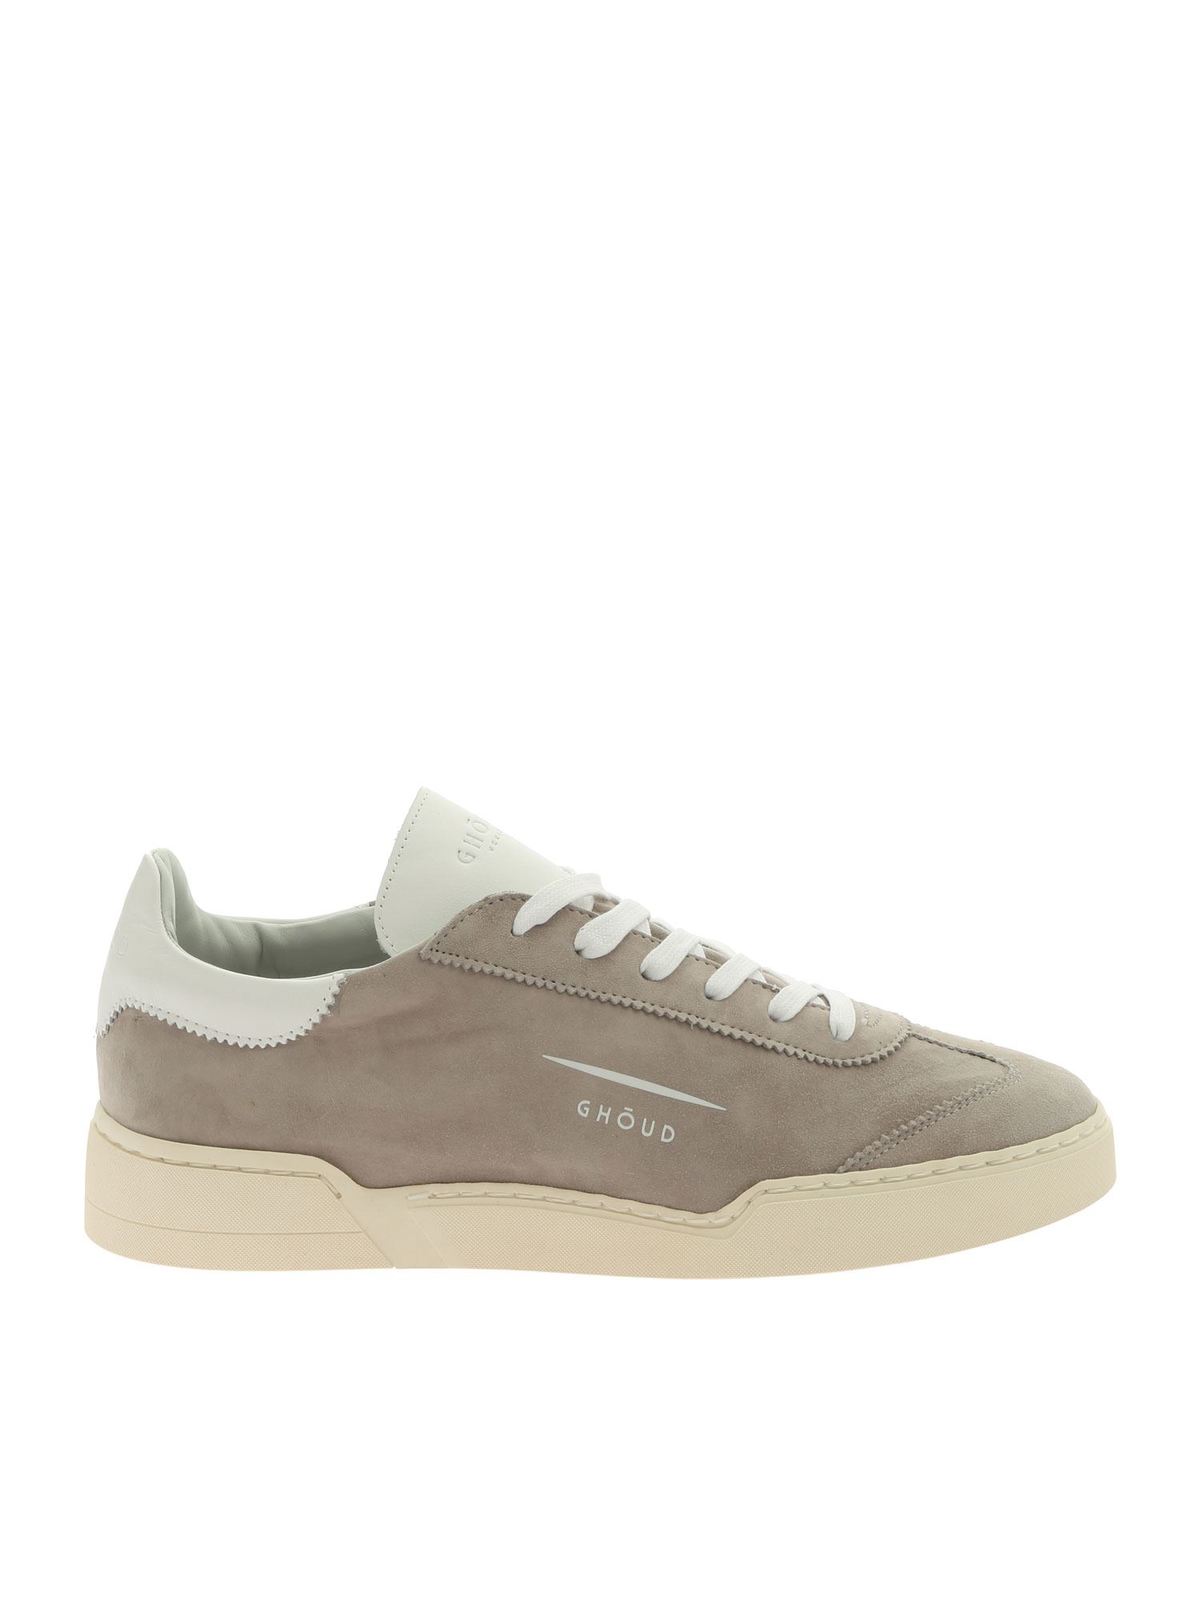 Ghoud Venice - Lob 01 gray sneakers in suede leather - trainers - L1LMSL46